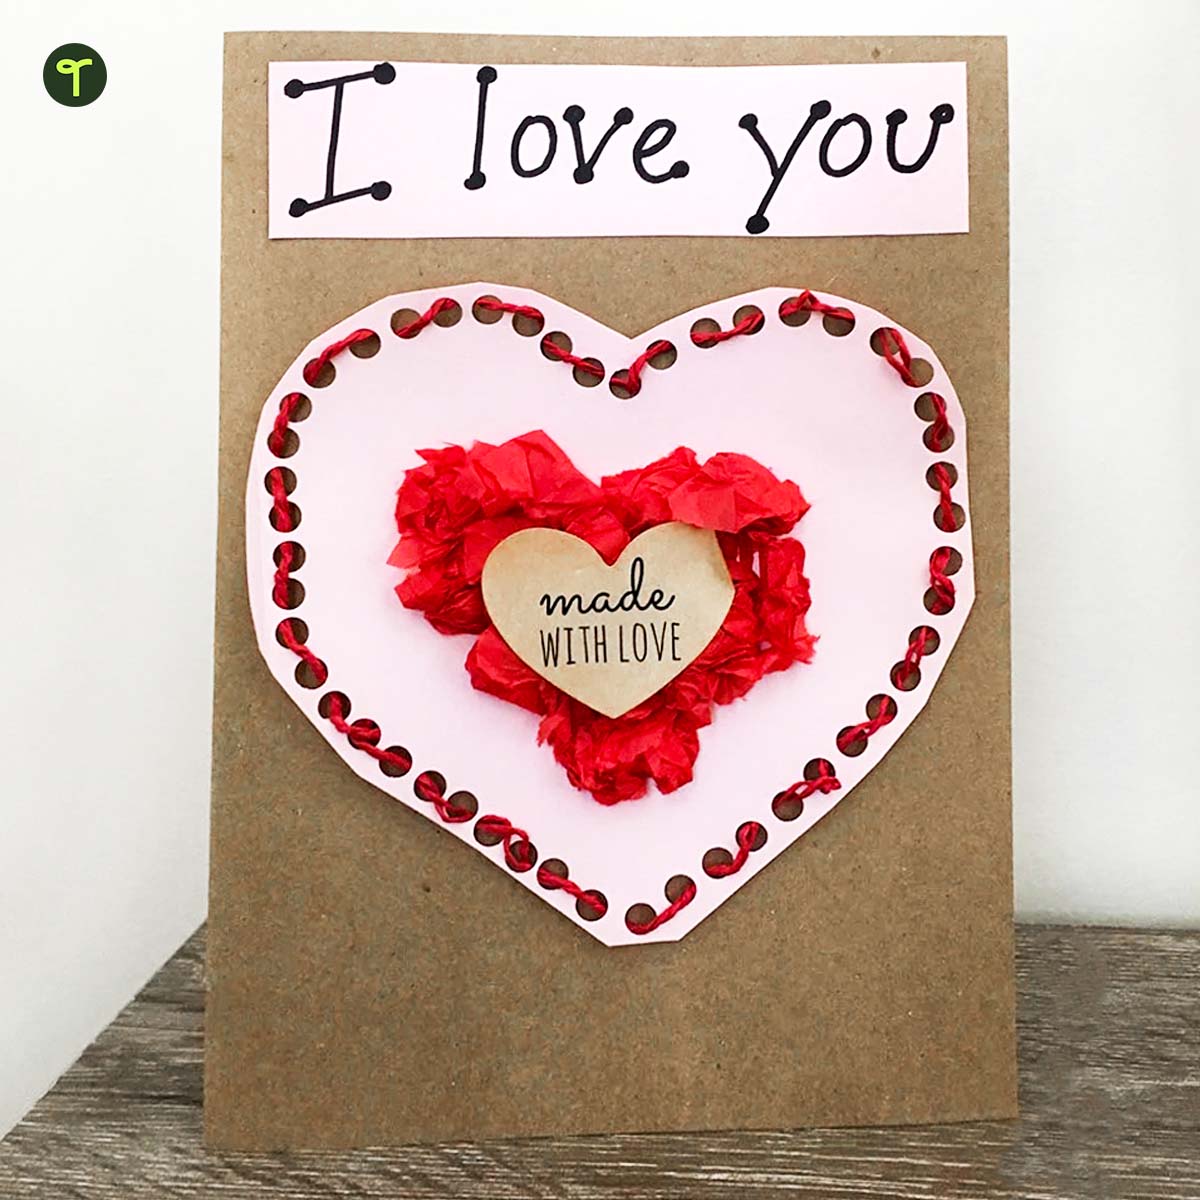 Valentine's Day craft idea for kids featuring a threaded heart in the center to work kids'fine motor skills